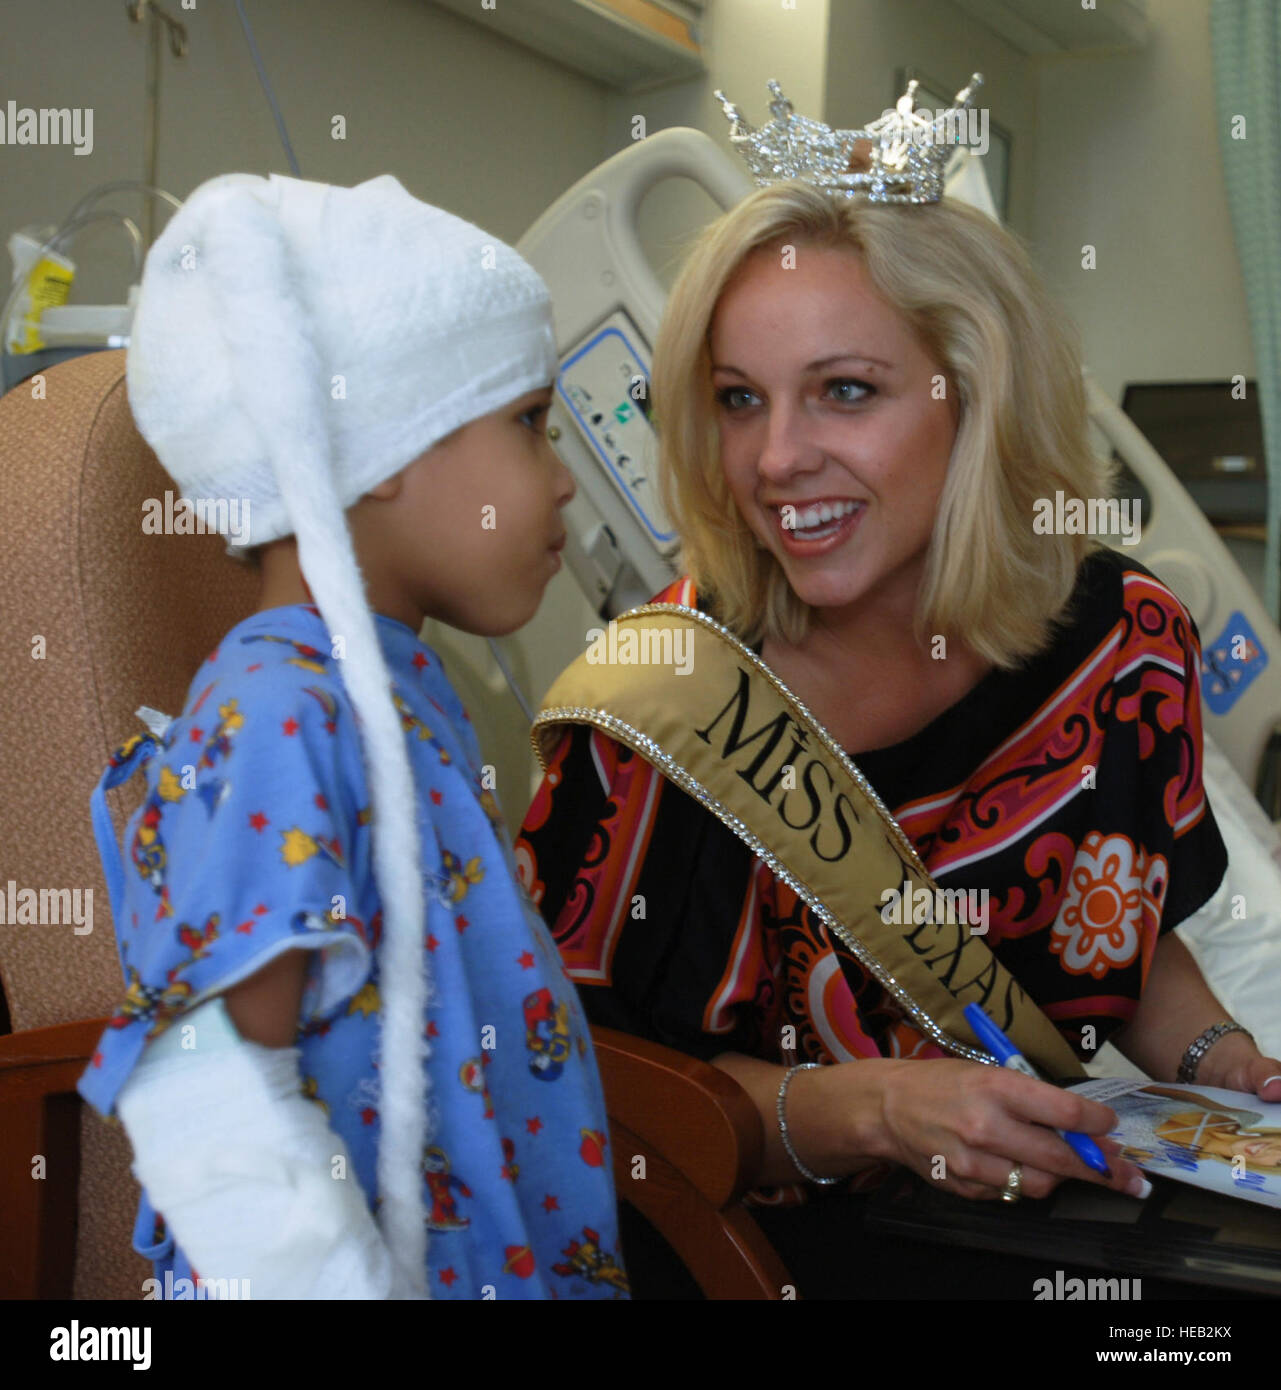 Brooke Daniels, Miss Texas 2009, visits with a young patient on the pediatric ward at Wilford Hall Medical Center, Lackland Air Force Base, Texas, April 24.  The 22-year-old model and communciations major from Sam Houston State University visited several areas of the hospital along with Alanna Sarabia, Miss San Antonio 2009.  Senior Airman Josie Kemp) Stock Photo